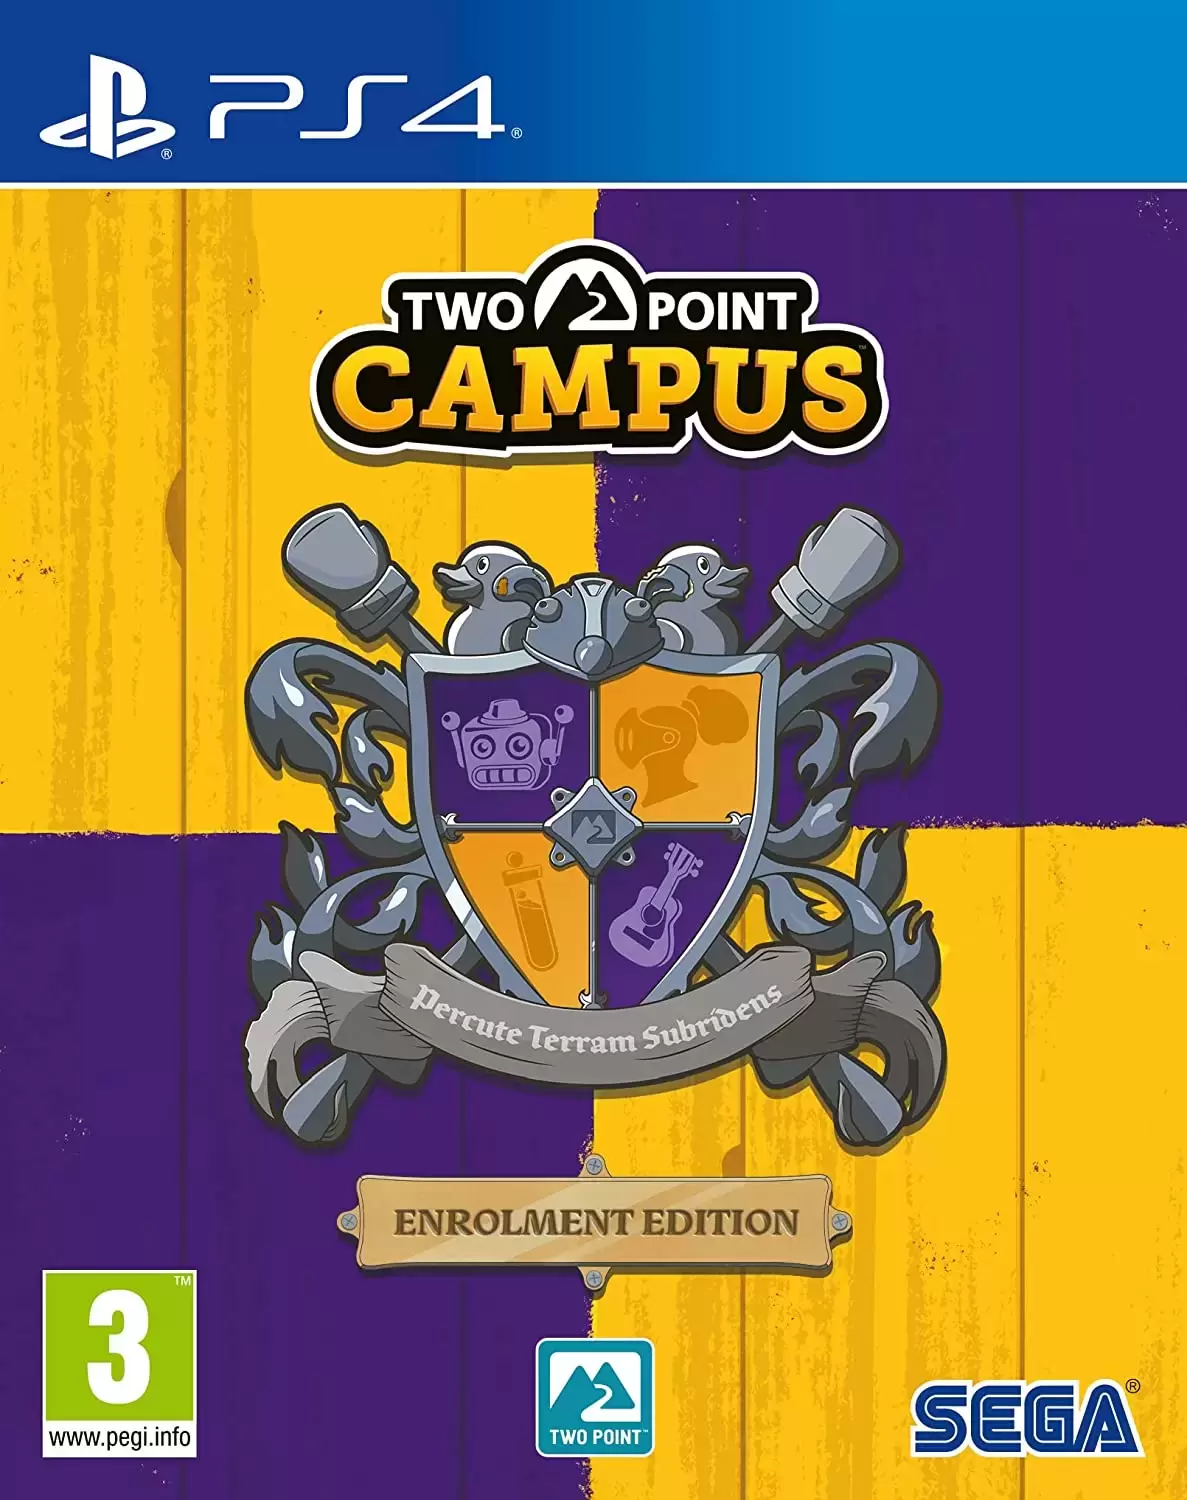 PS4 Games - Two Point Campus - Enrolment Edition